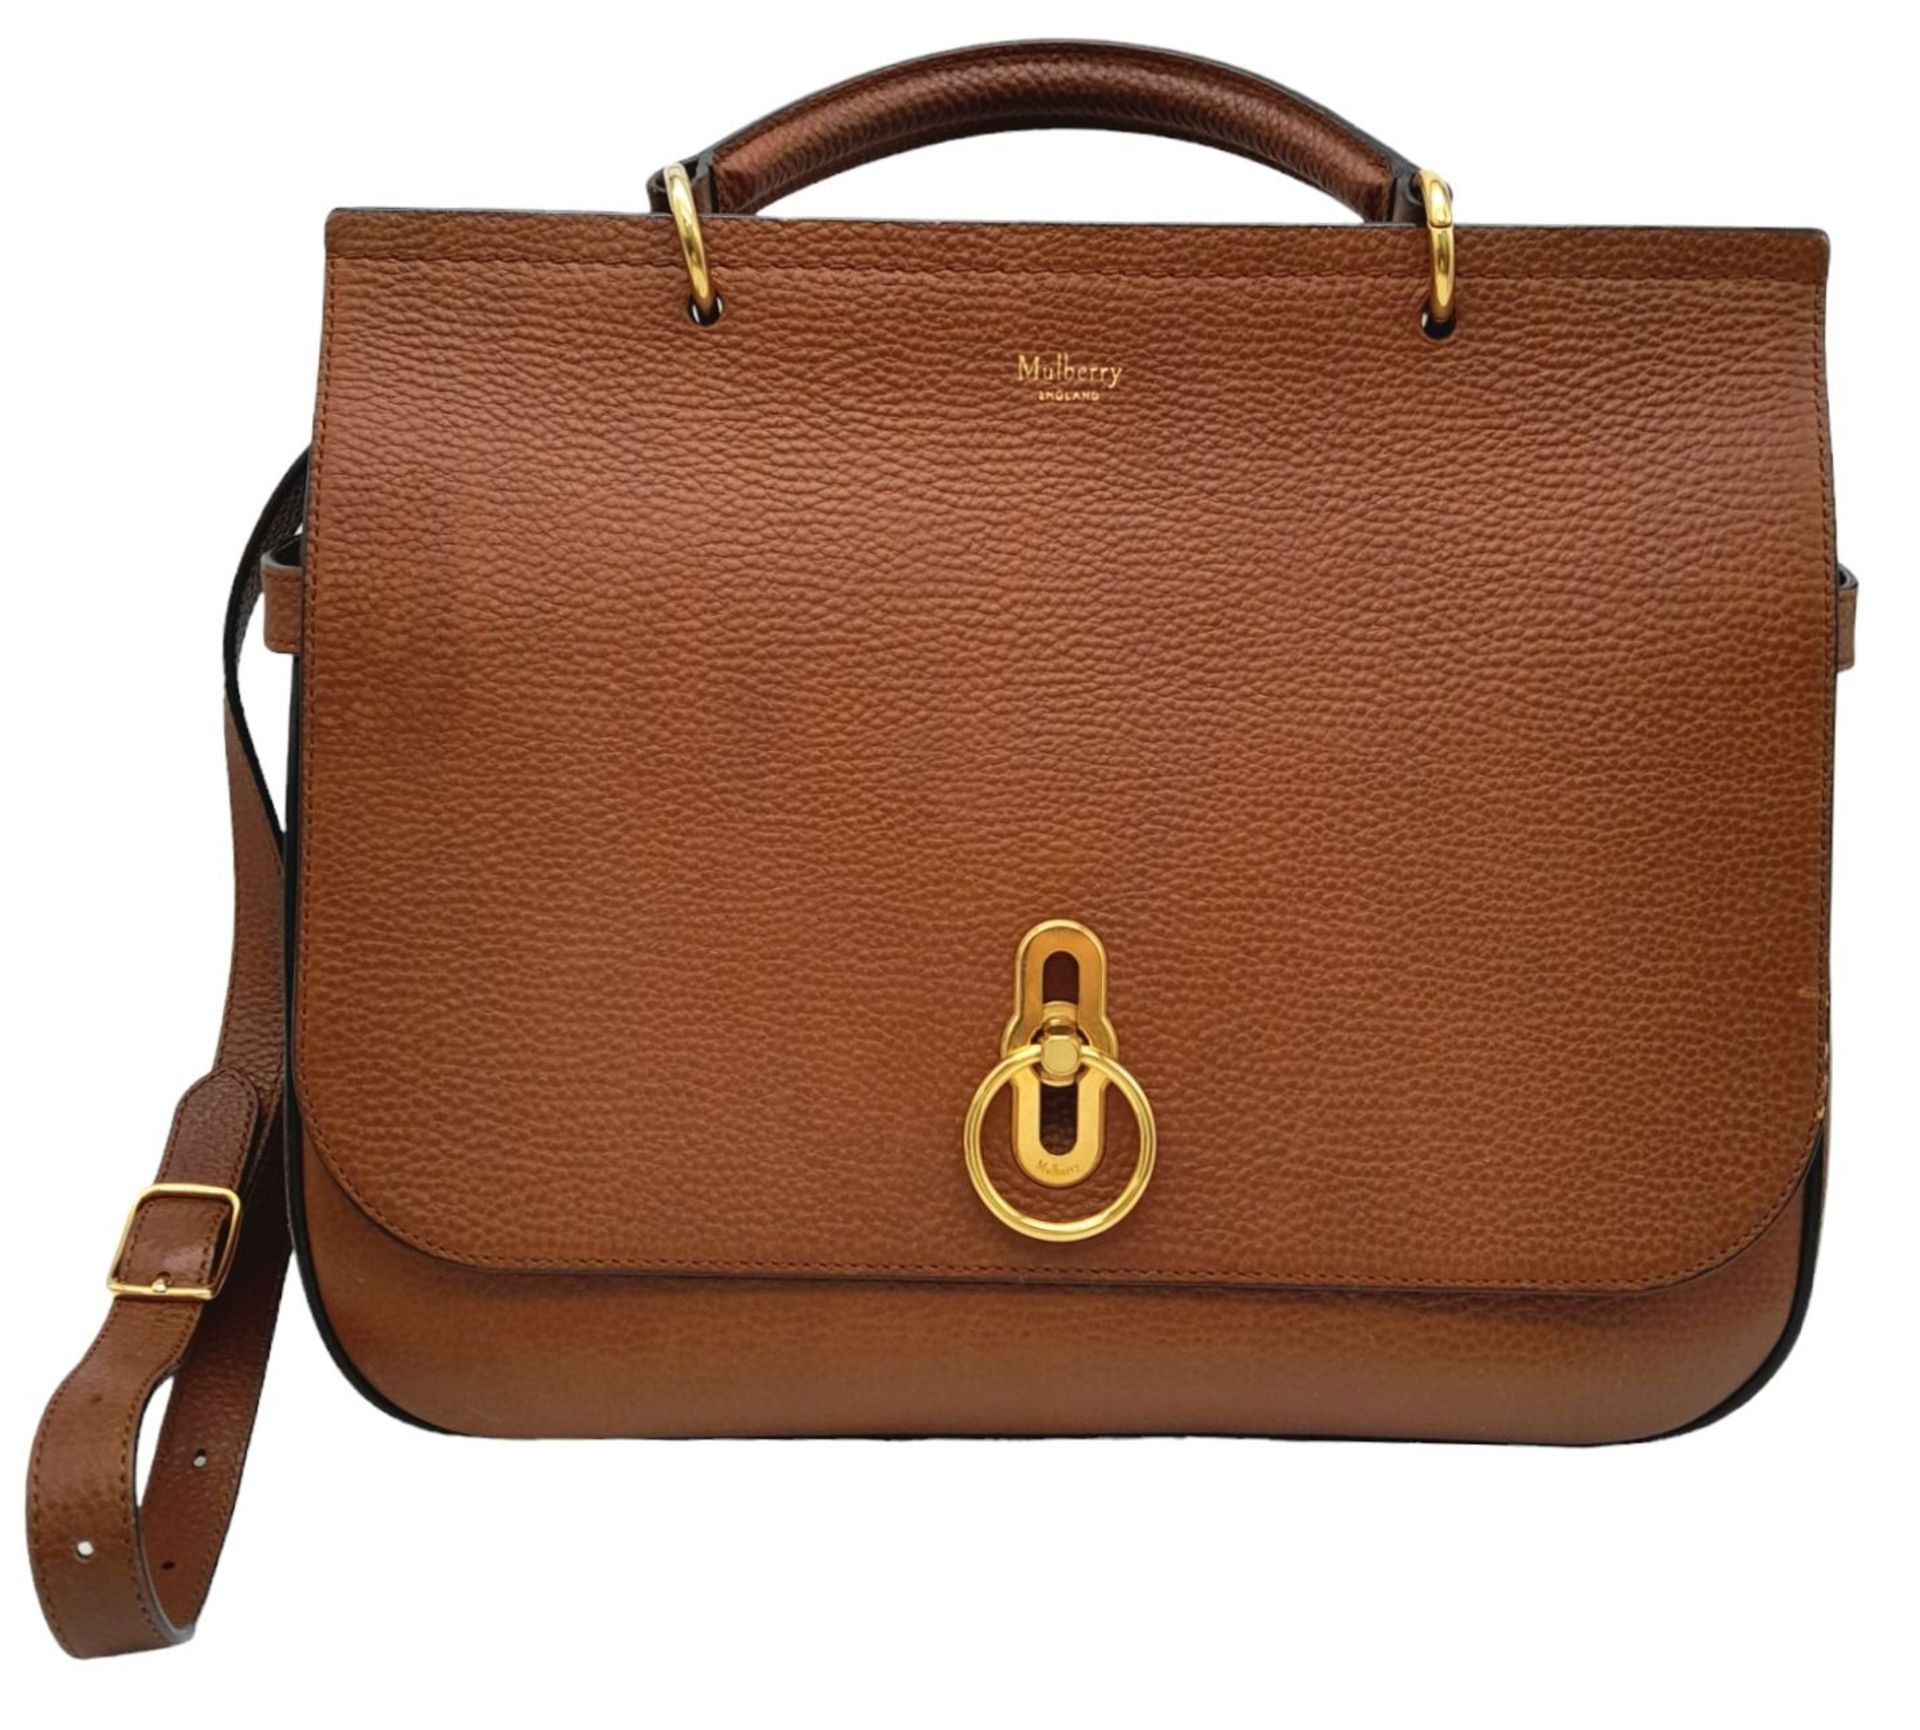 A Mulberry Amberley Satchel Handbag. Brown leather exterior with gold tone hardware. Flap-over front